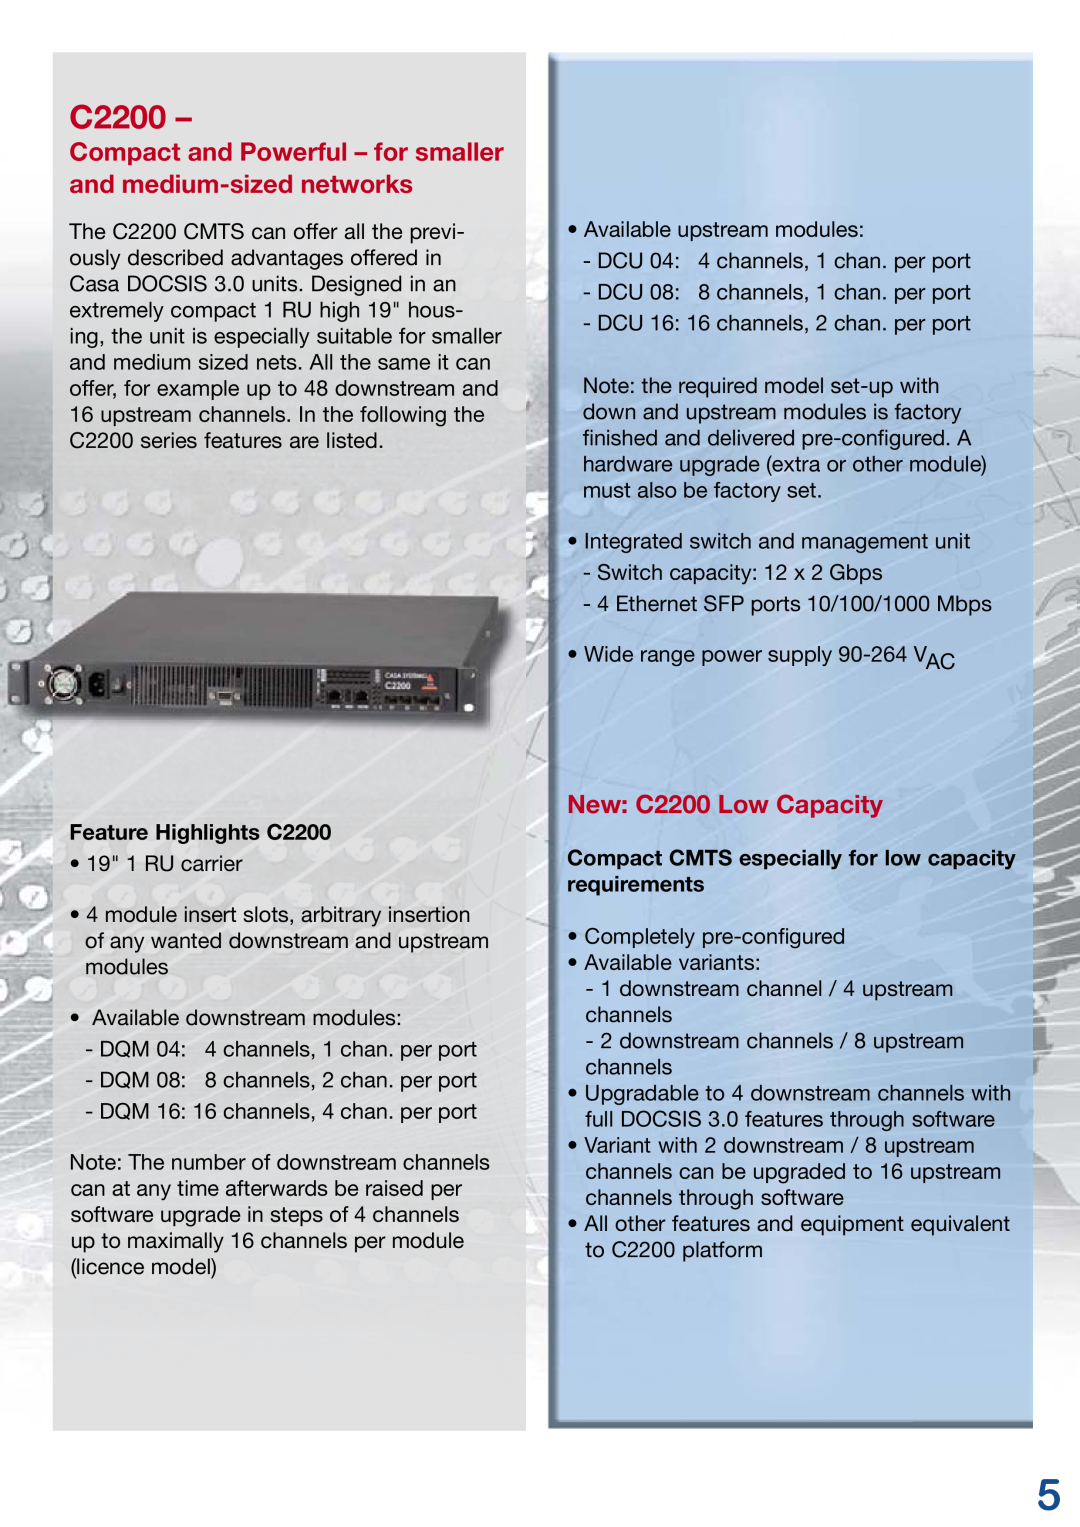 Kathrein 3 manual New C2200 Low Capacity, Compact and Powerful - for smaller and medium-sized networks 